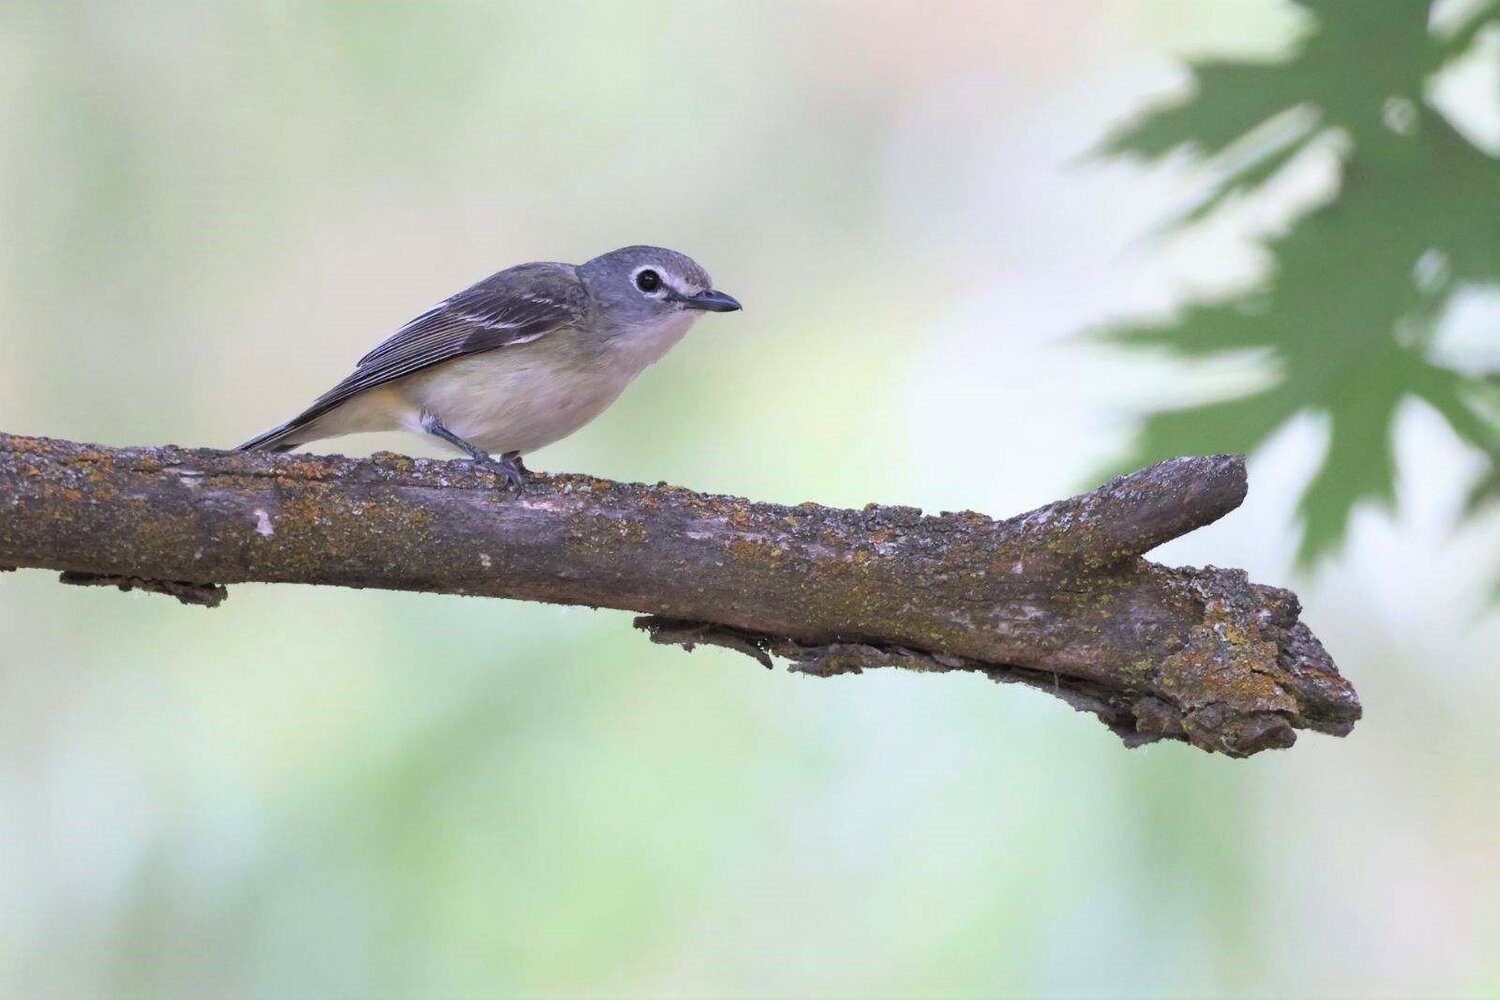 Cassin's Vireo - Note wing bars and faintly blue head